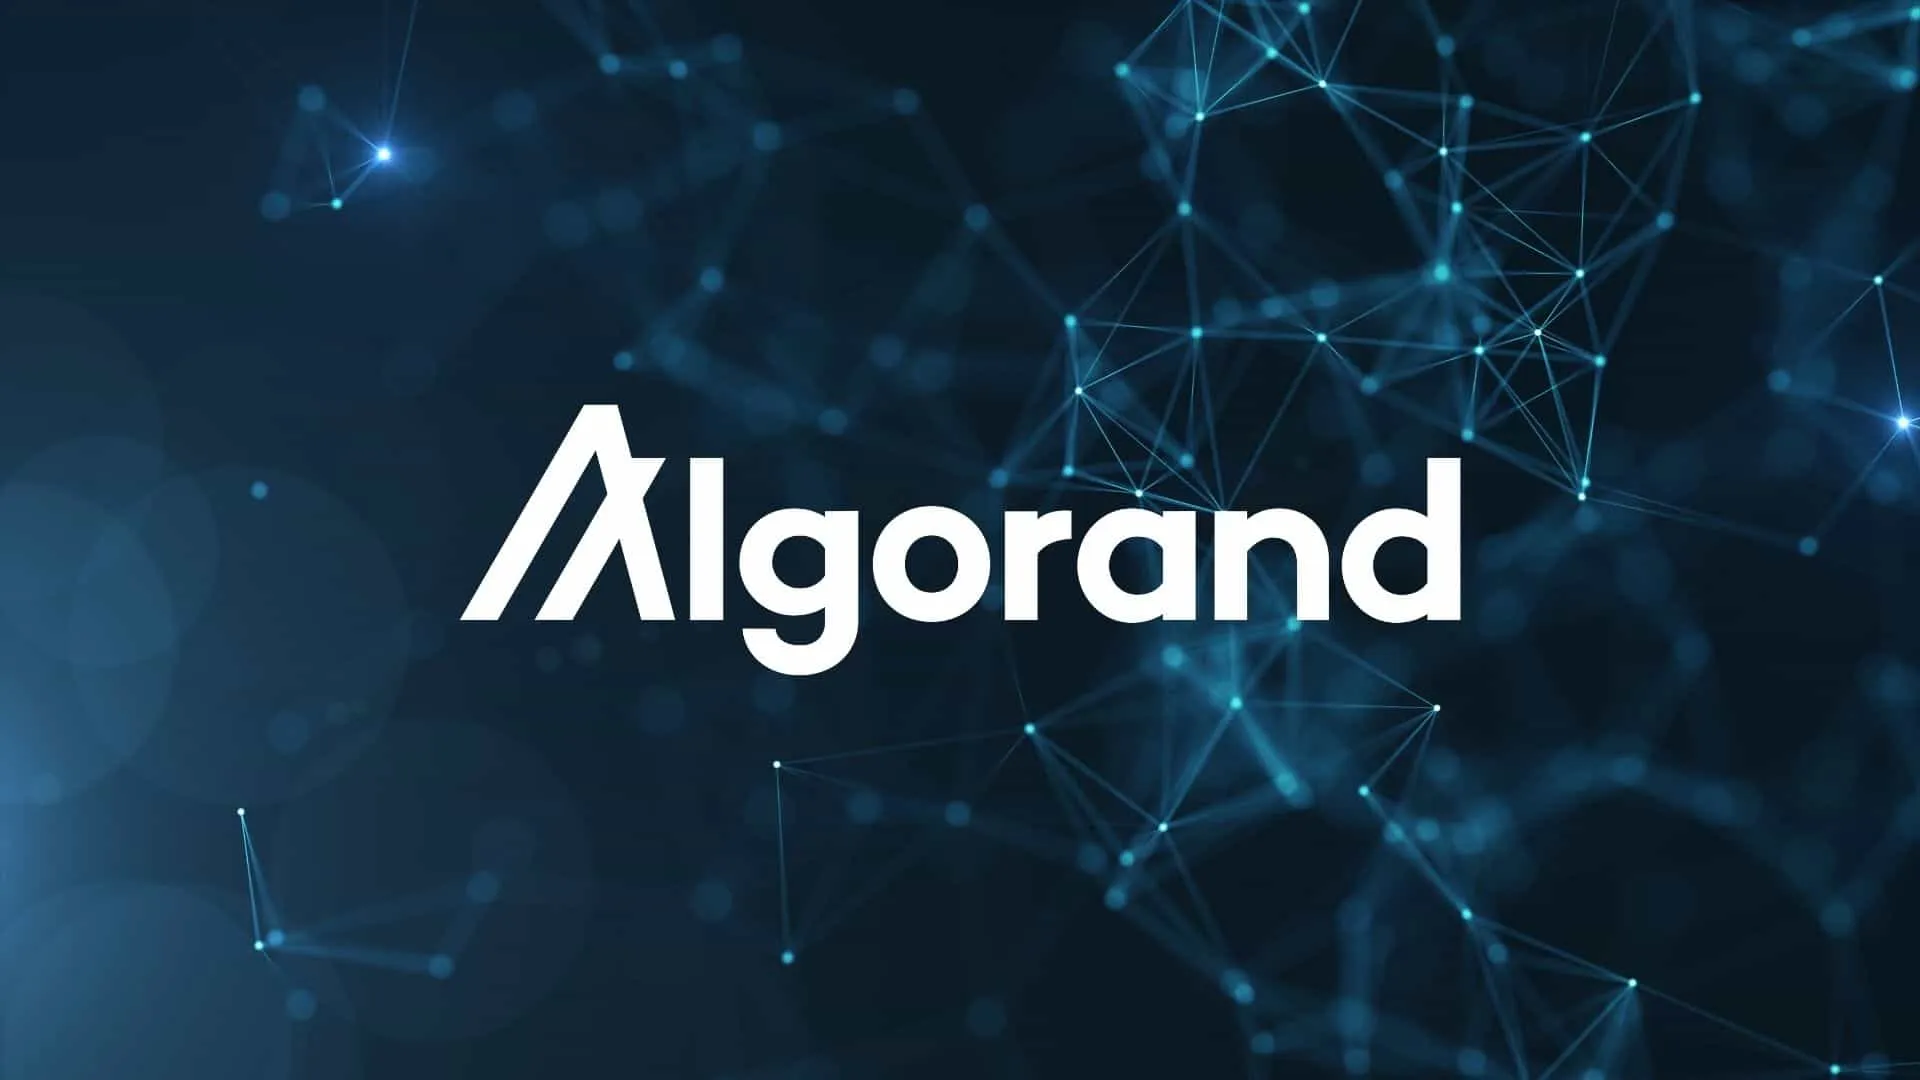 Algorand likely to influence the future of dApps